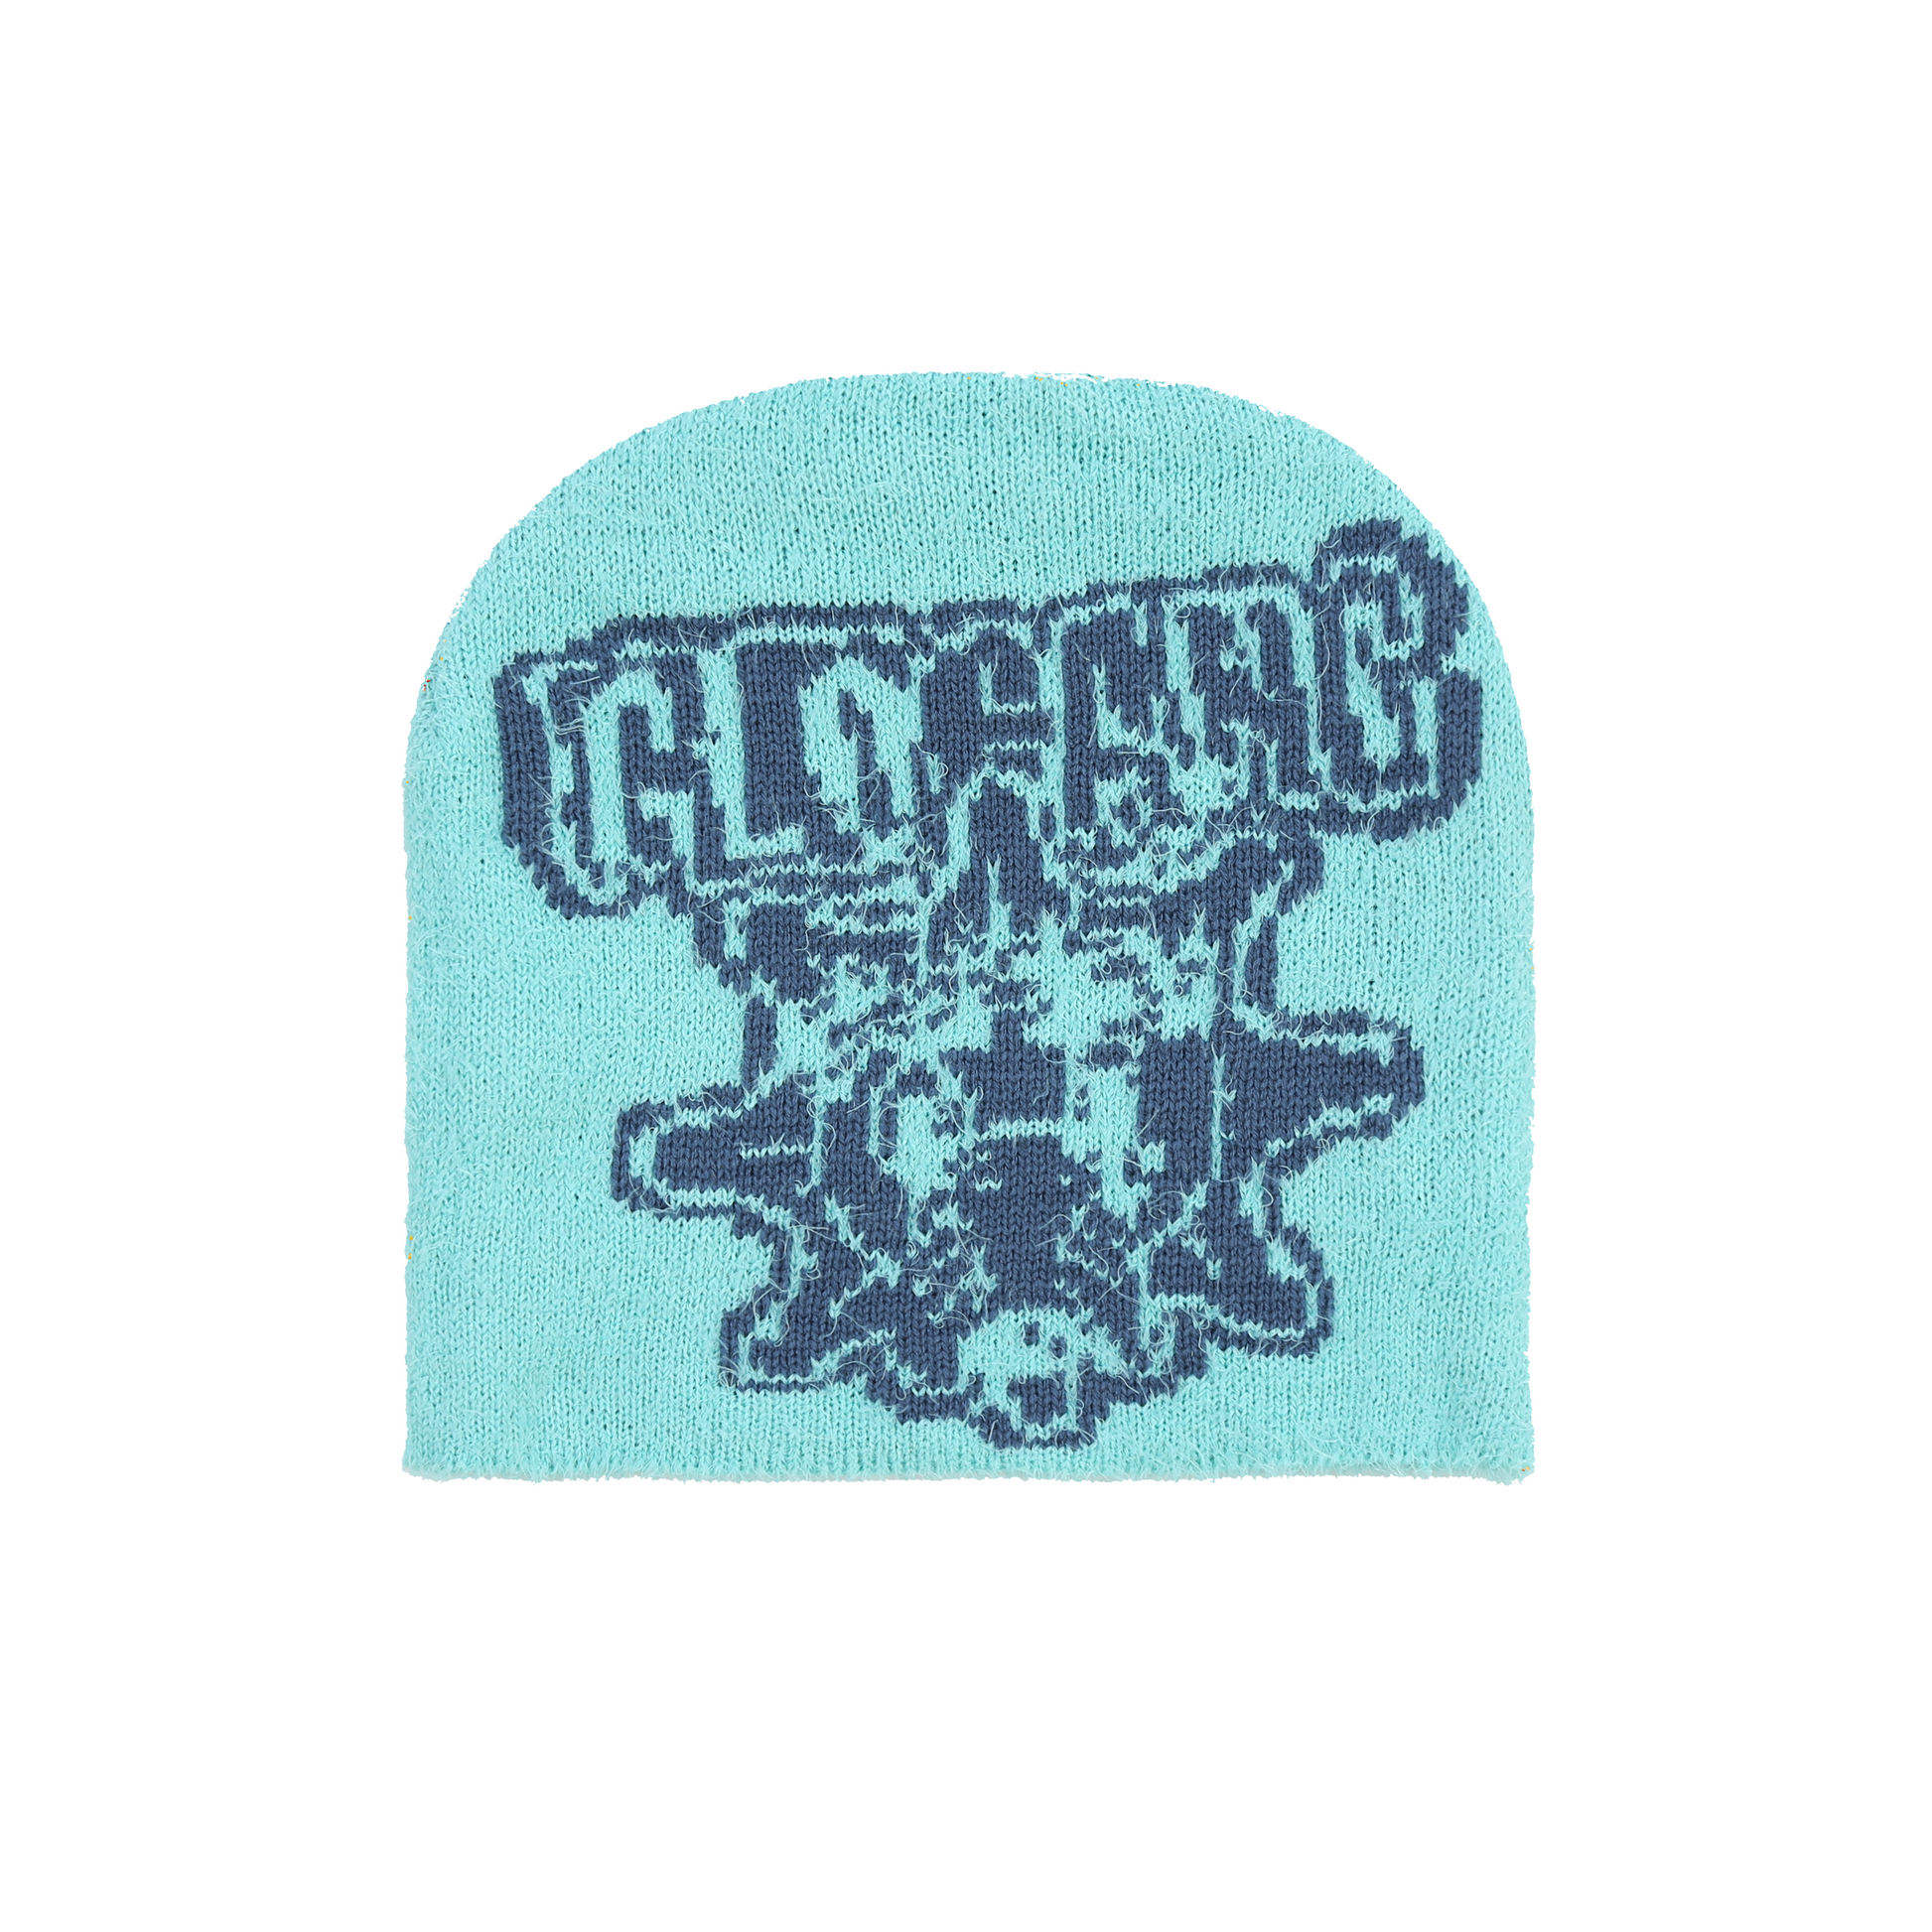 GloGang Almighty Beanie新品帽子 - ニットキャップ/ビーニー